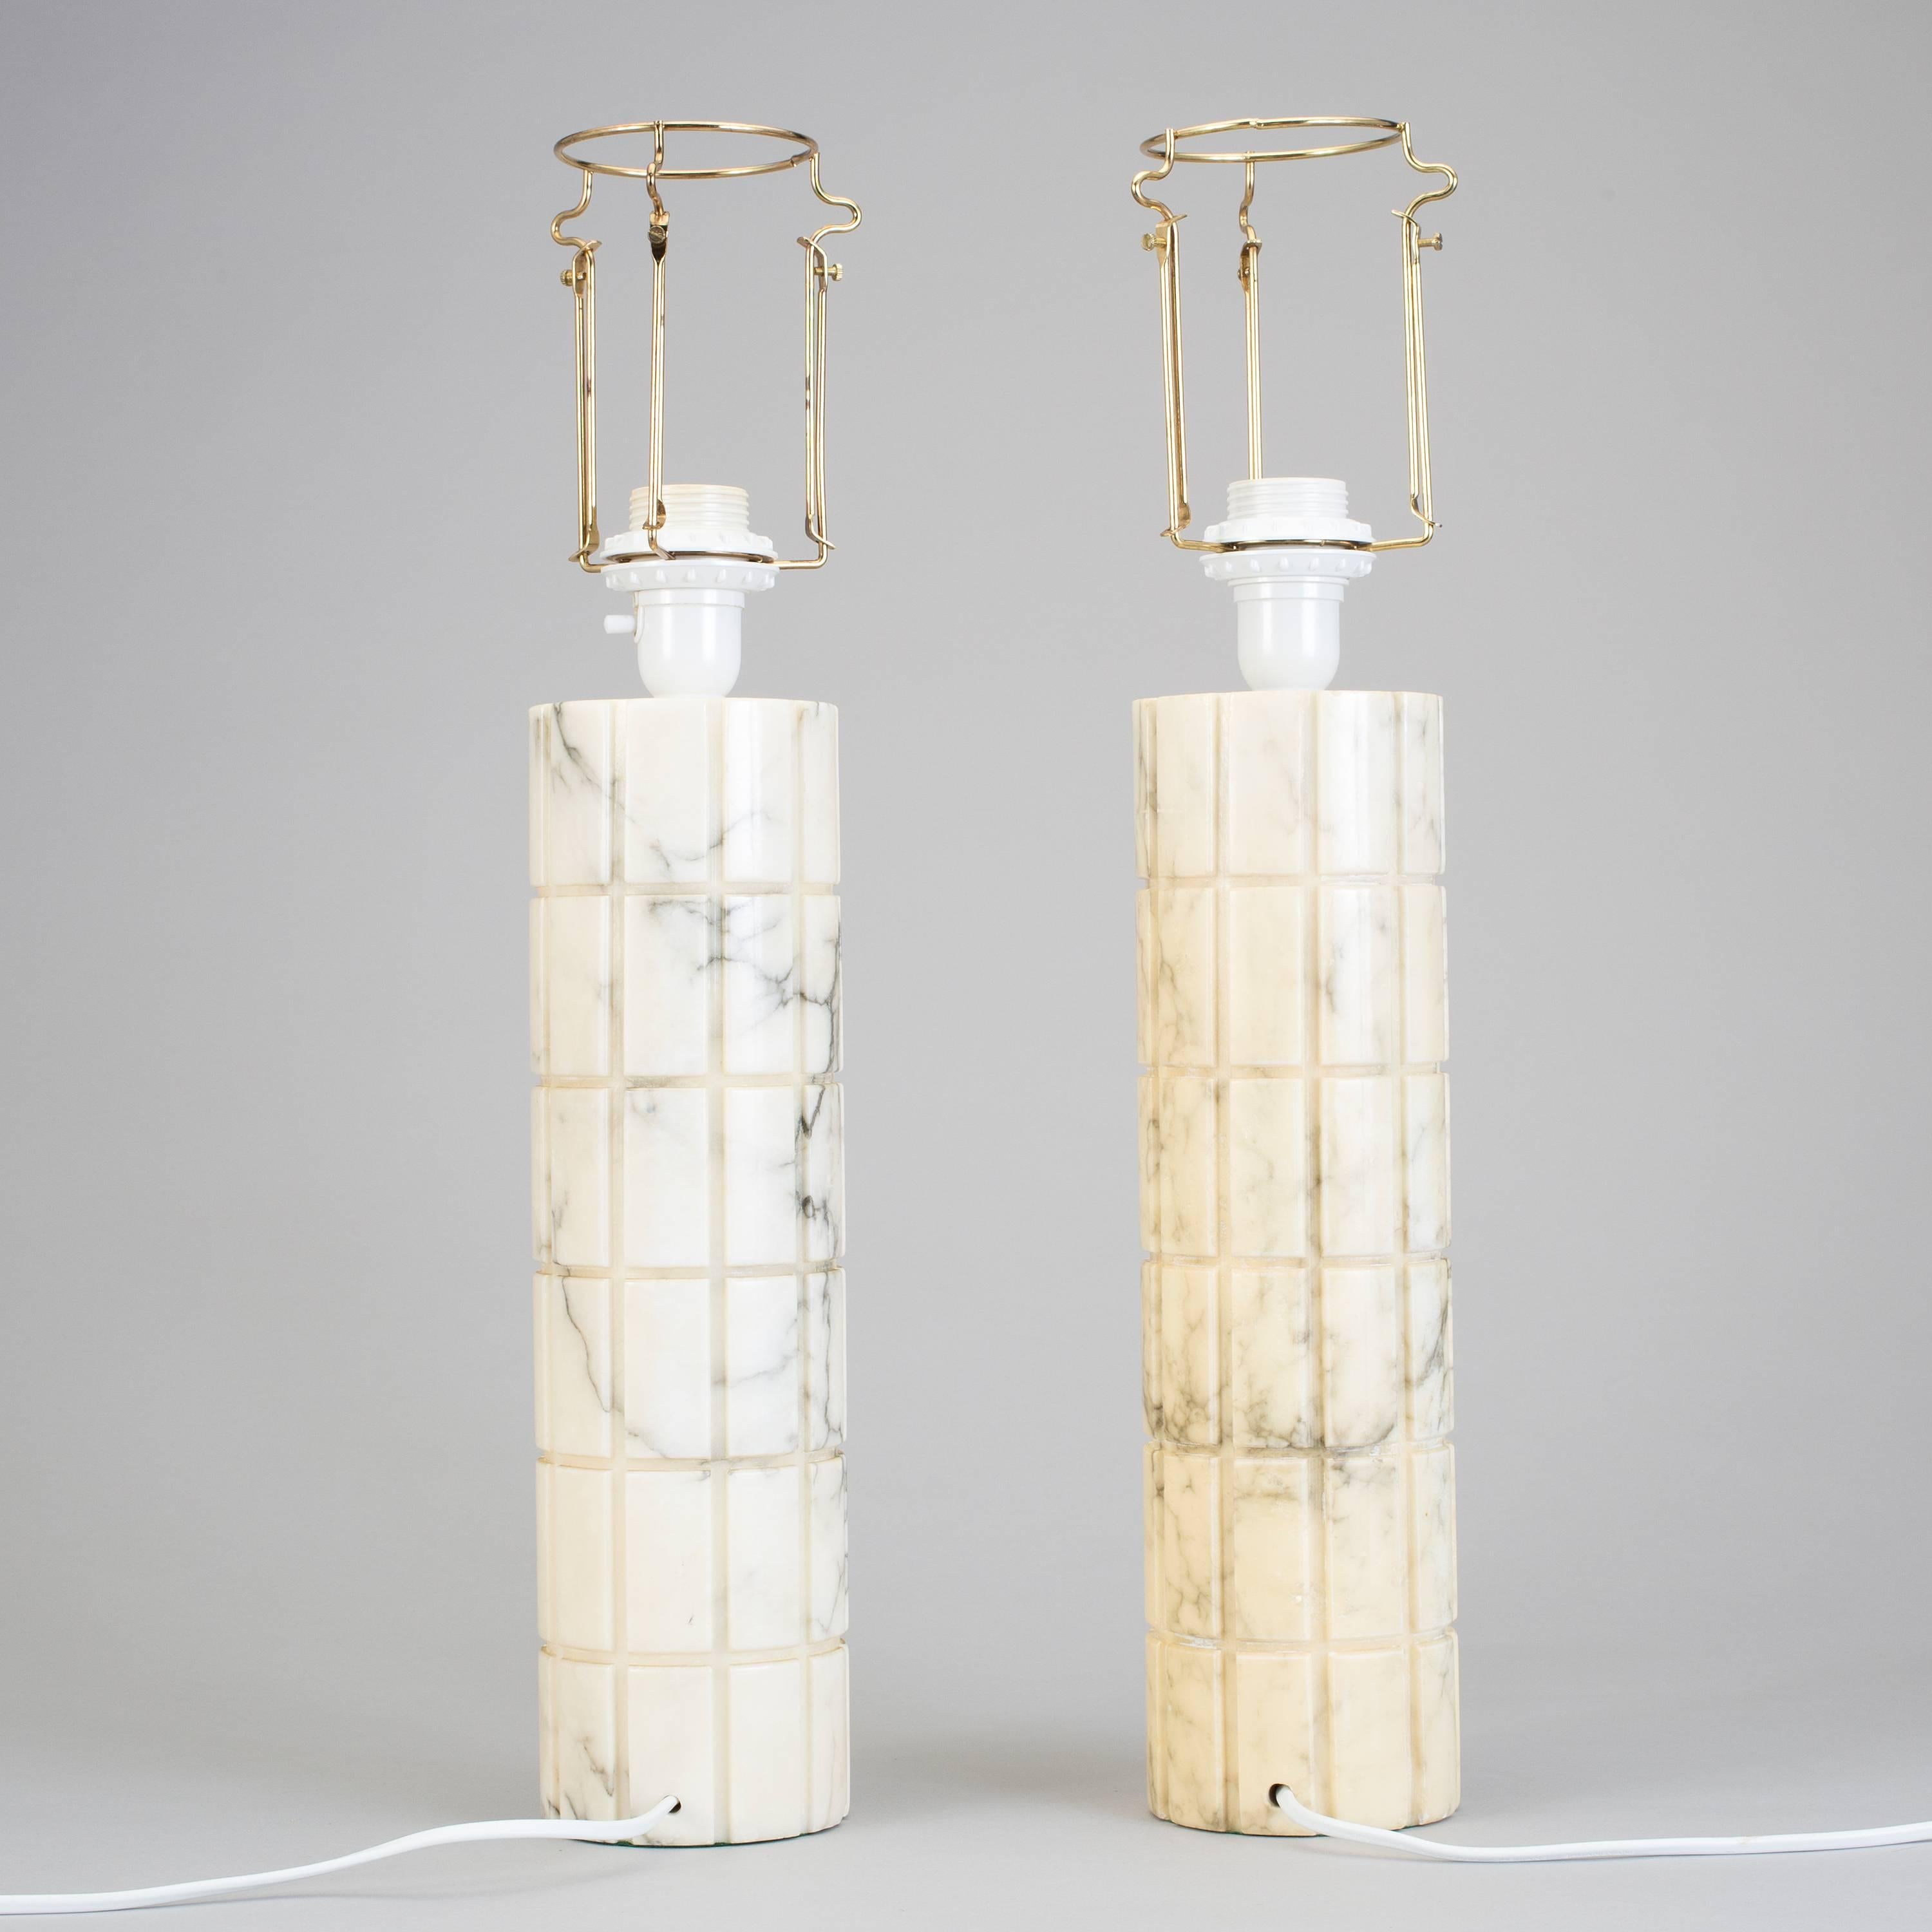 Rare pair of table lamps by Bergboms in white marble,
round column base featuring carved rectangular grid who create a nice effect of shadows when lit.